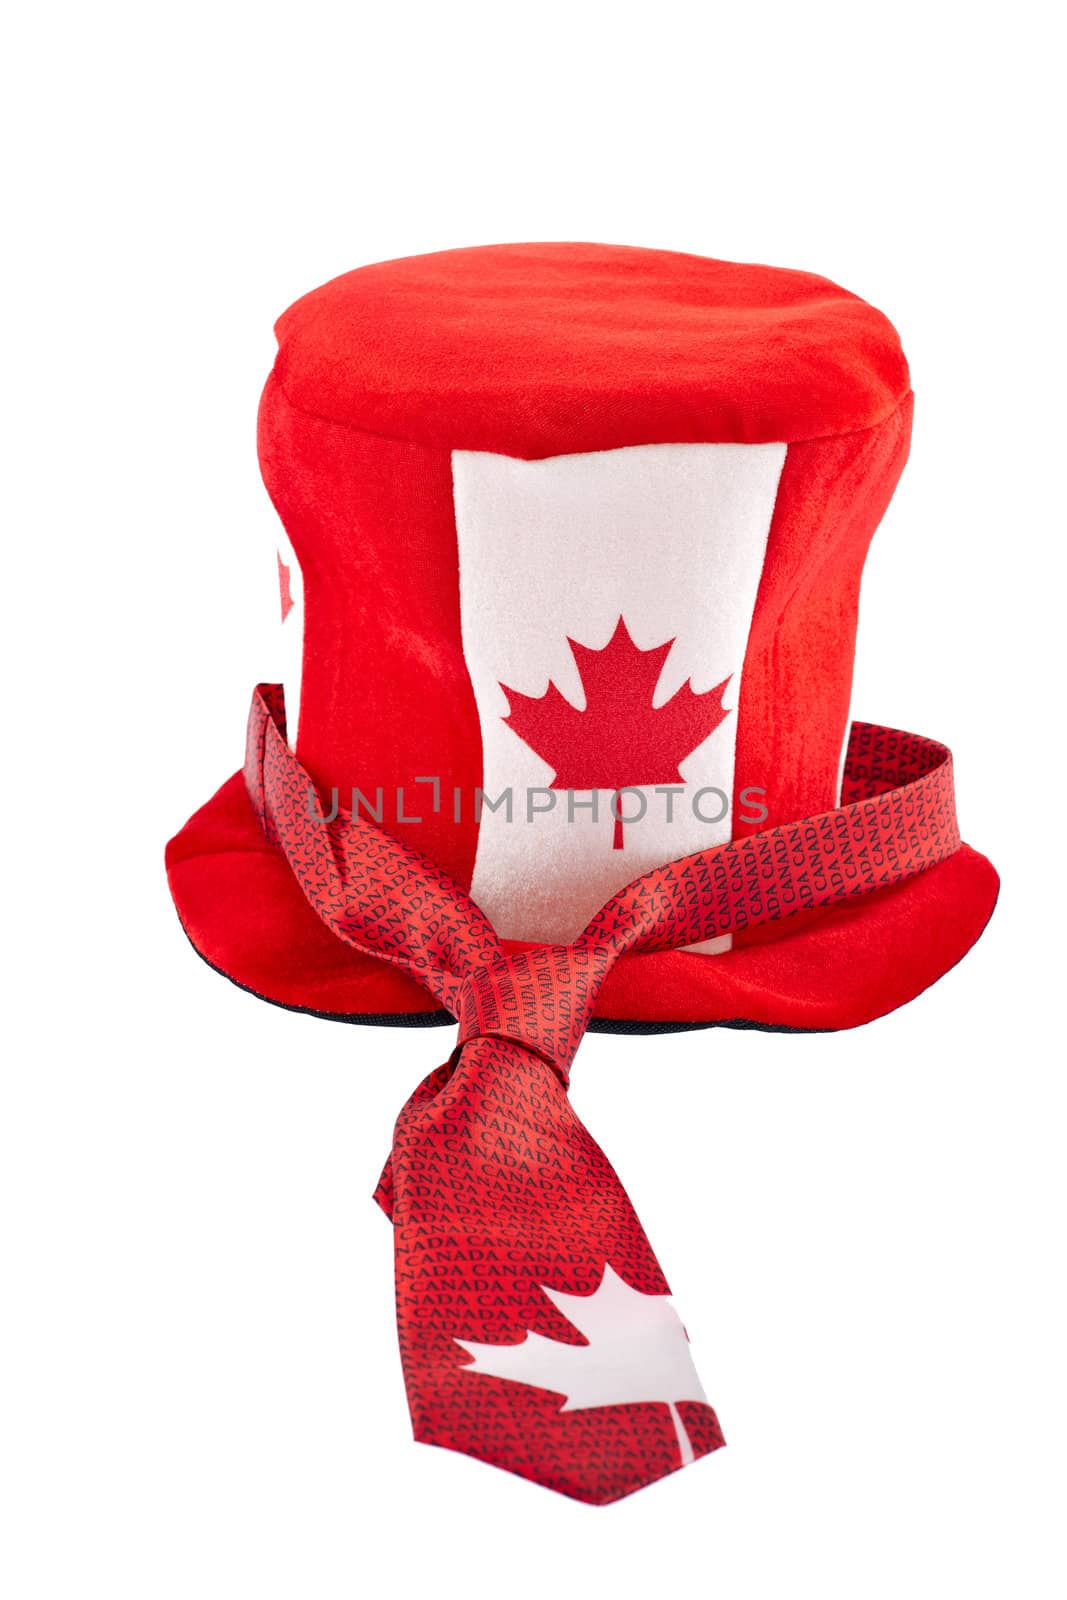 Canada Day national holiday apparels by Marcus